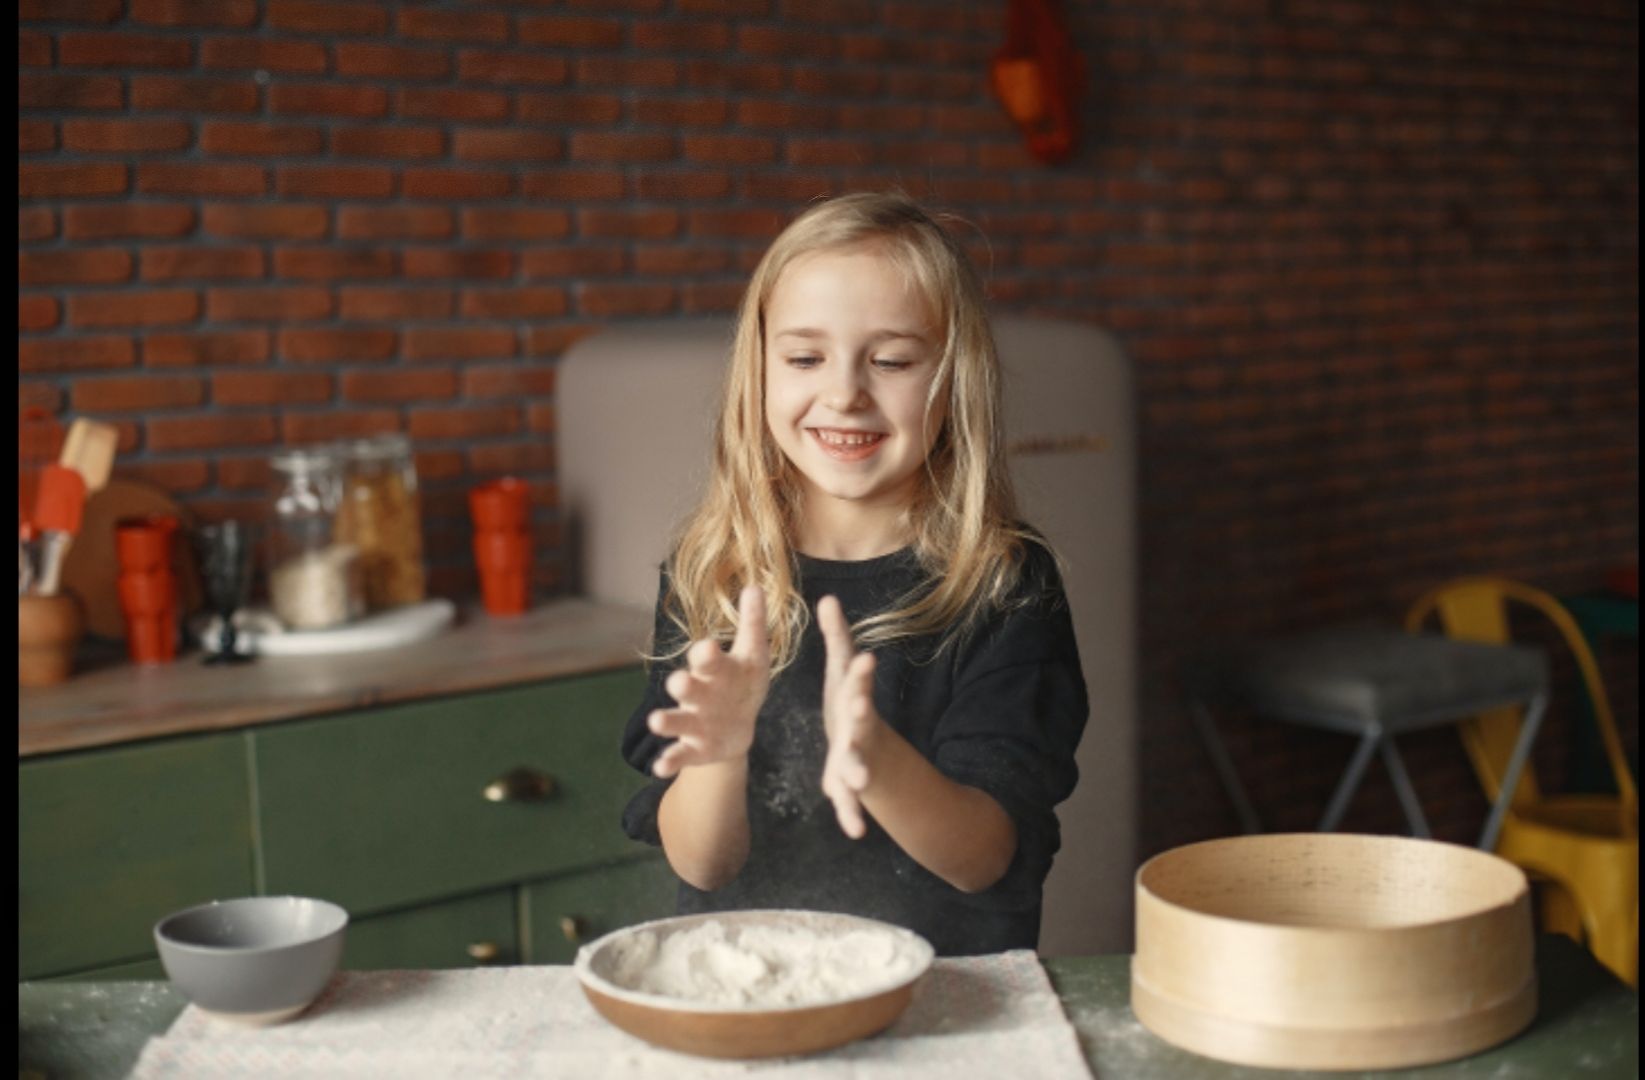 Photo by Gustavo Fring: https://www.pexels.com/photo/playful-little-girl-with-flour-in-loft-style-kitchen-3984748/